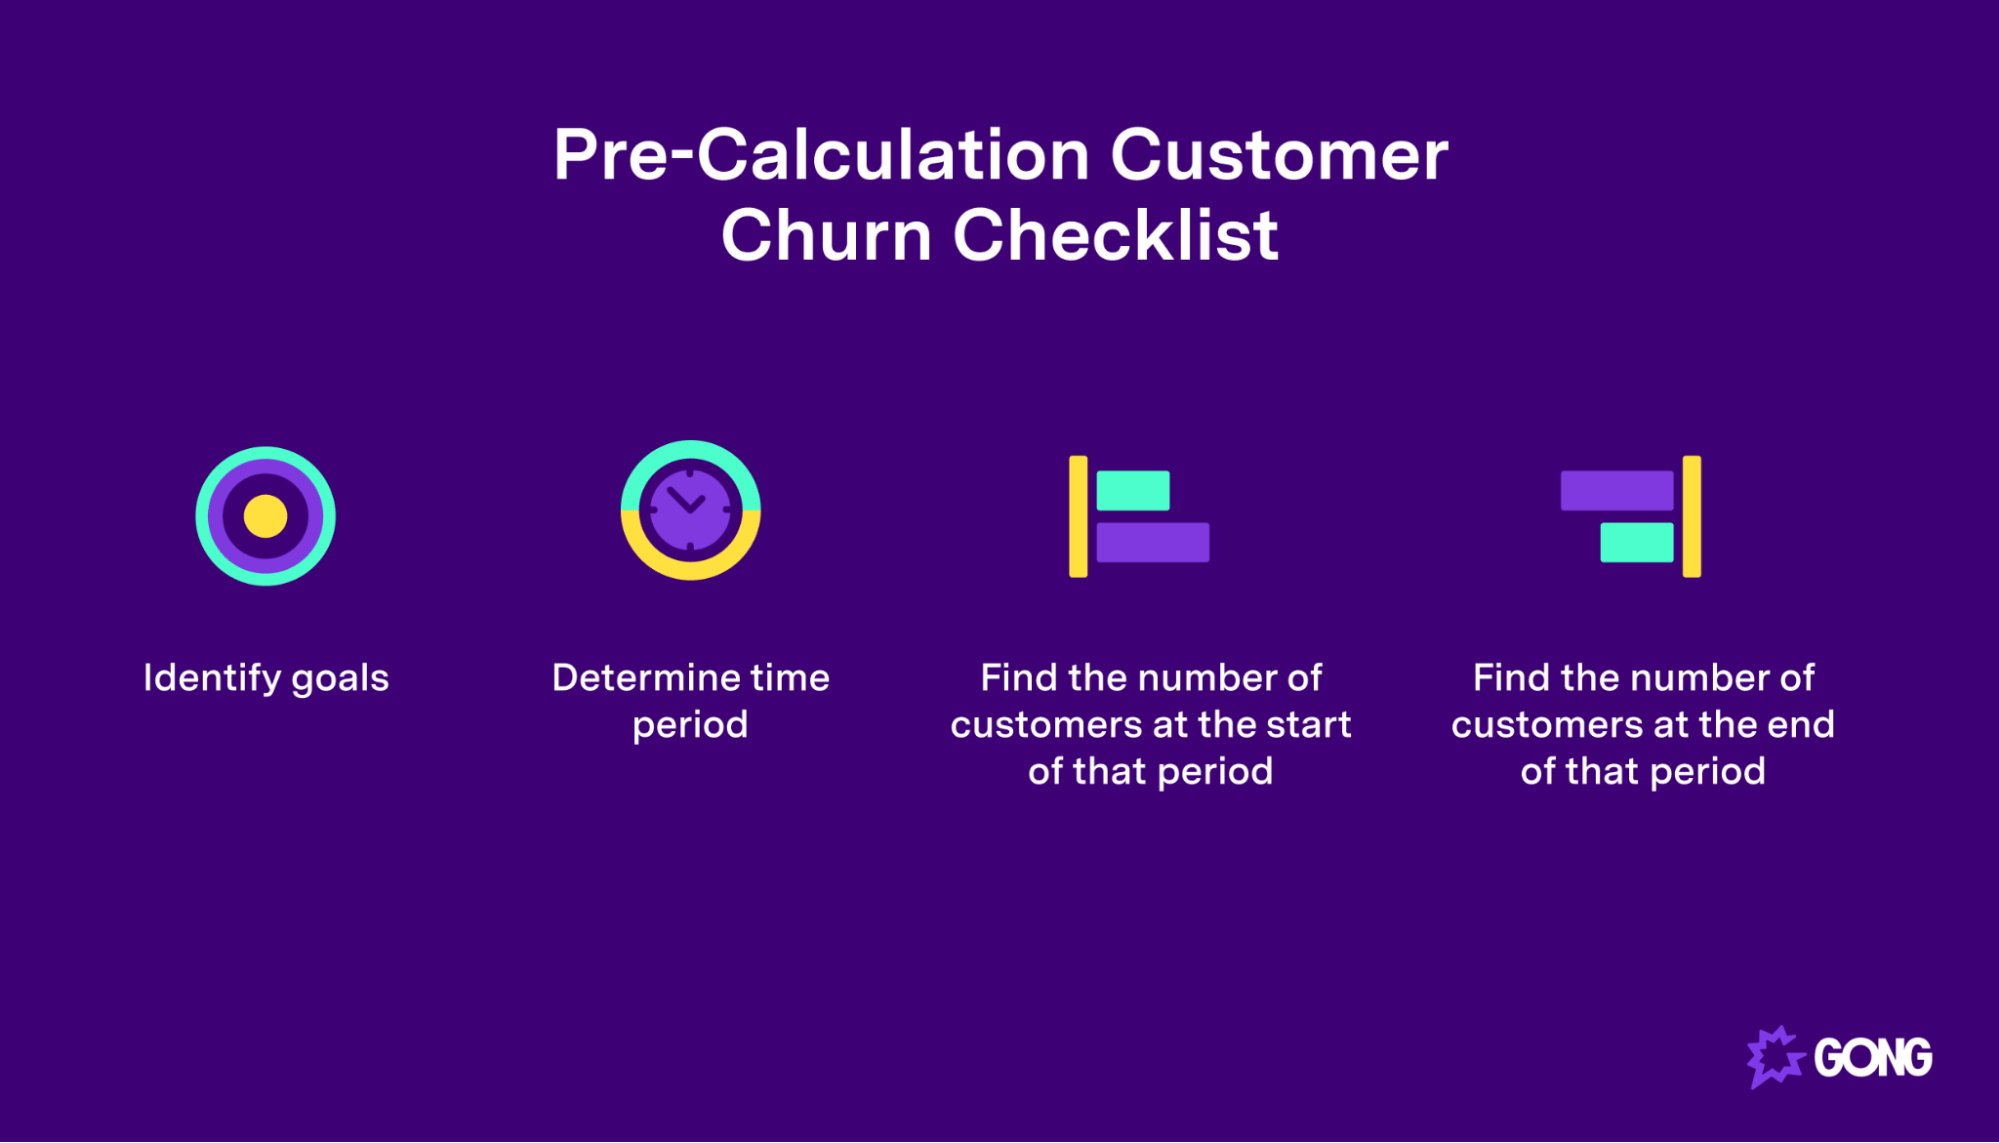 A checklist of information you need before calculating customer churn